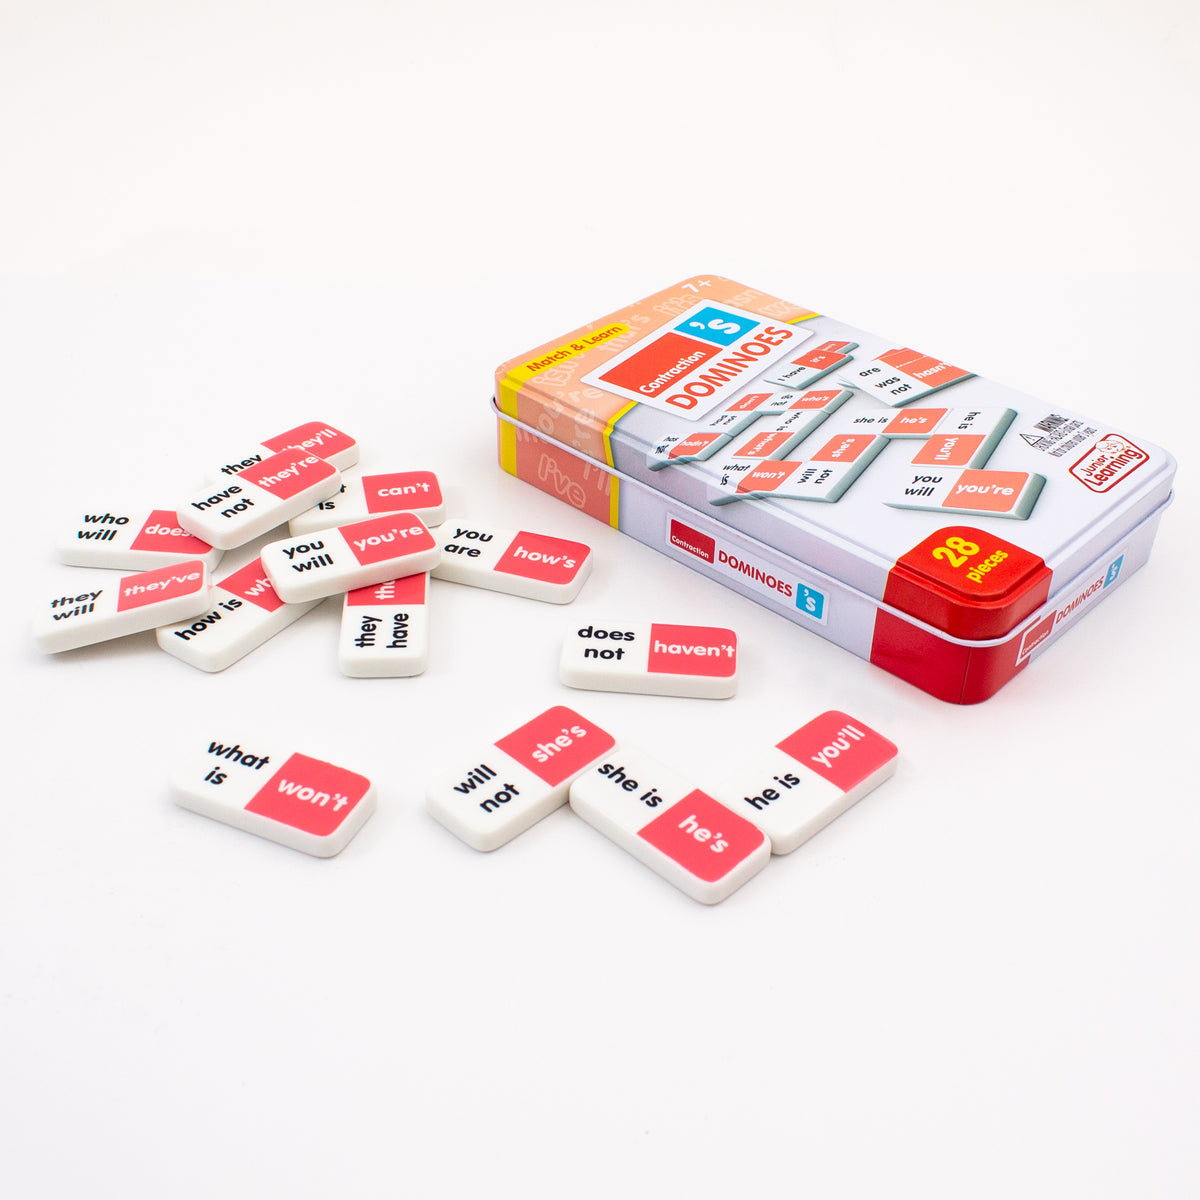 Junior Learning JL664 Contraction Dominoes tin and pieces